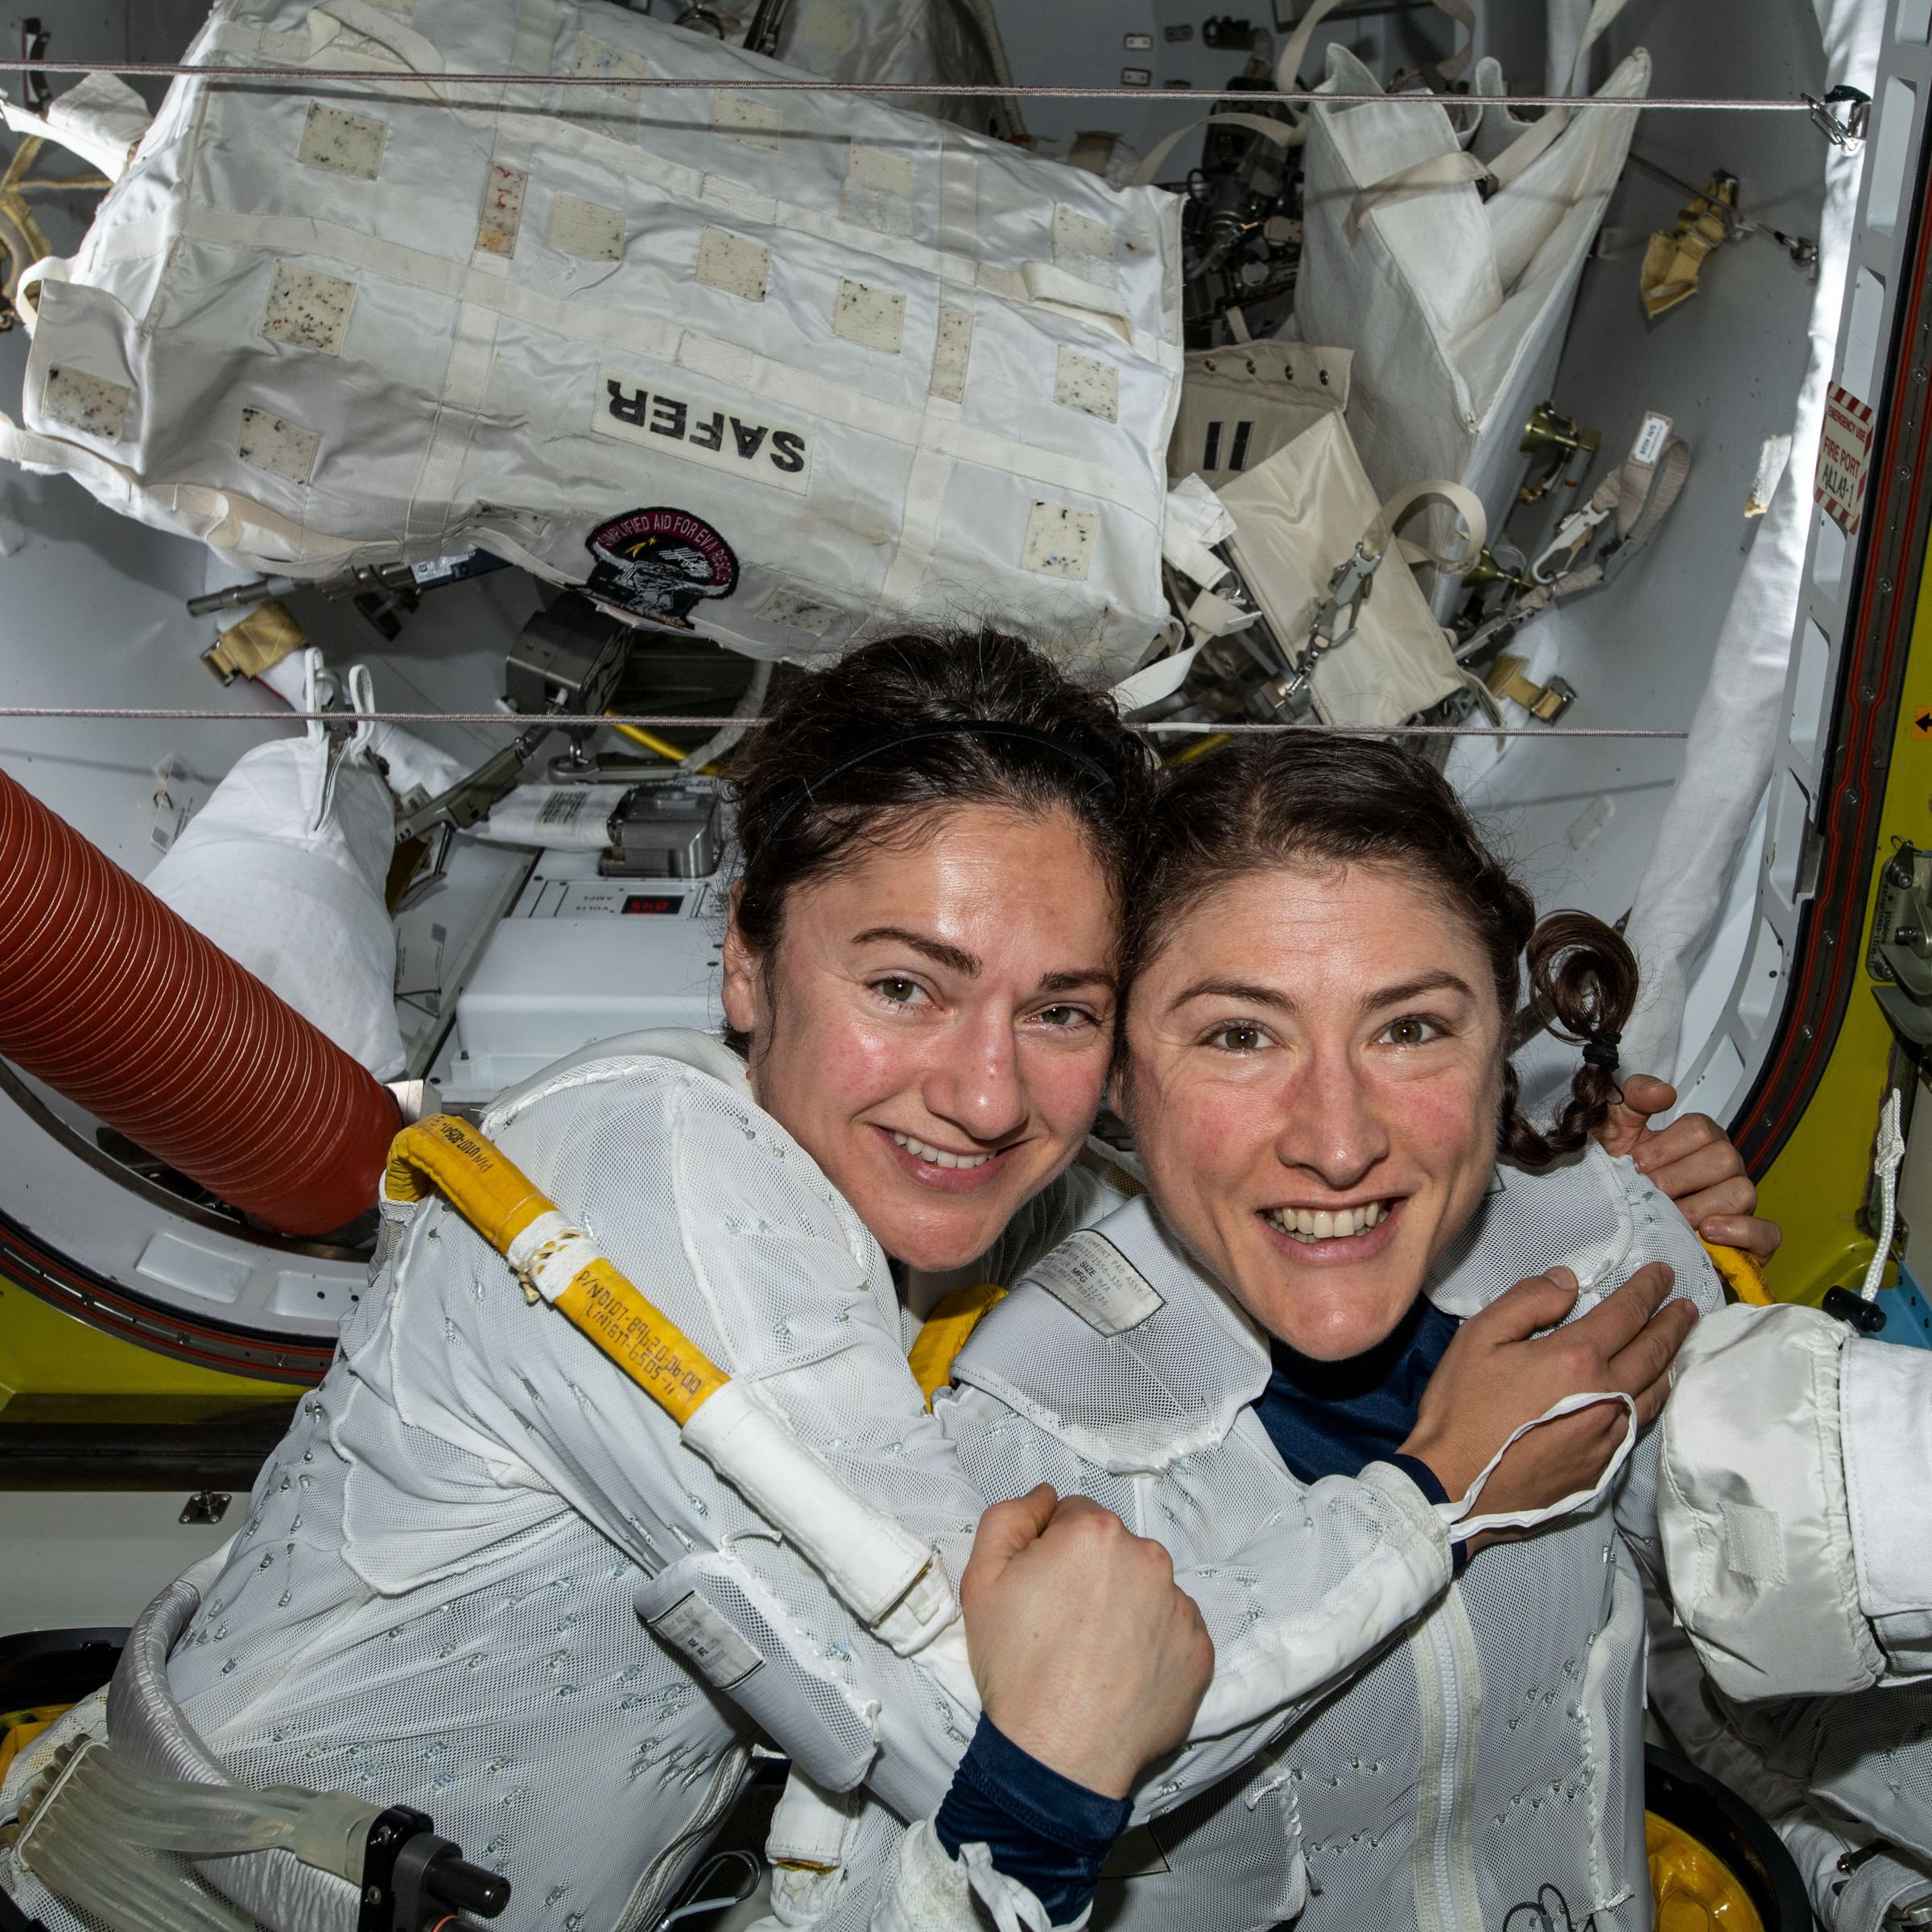 NASA astronauts Jessica Meir (L) and Christina Koch (R), preparing to leave the International Space Station for the first all-female spacewalk